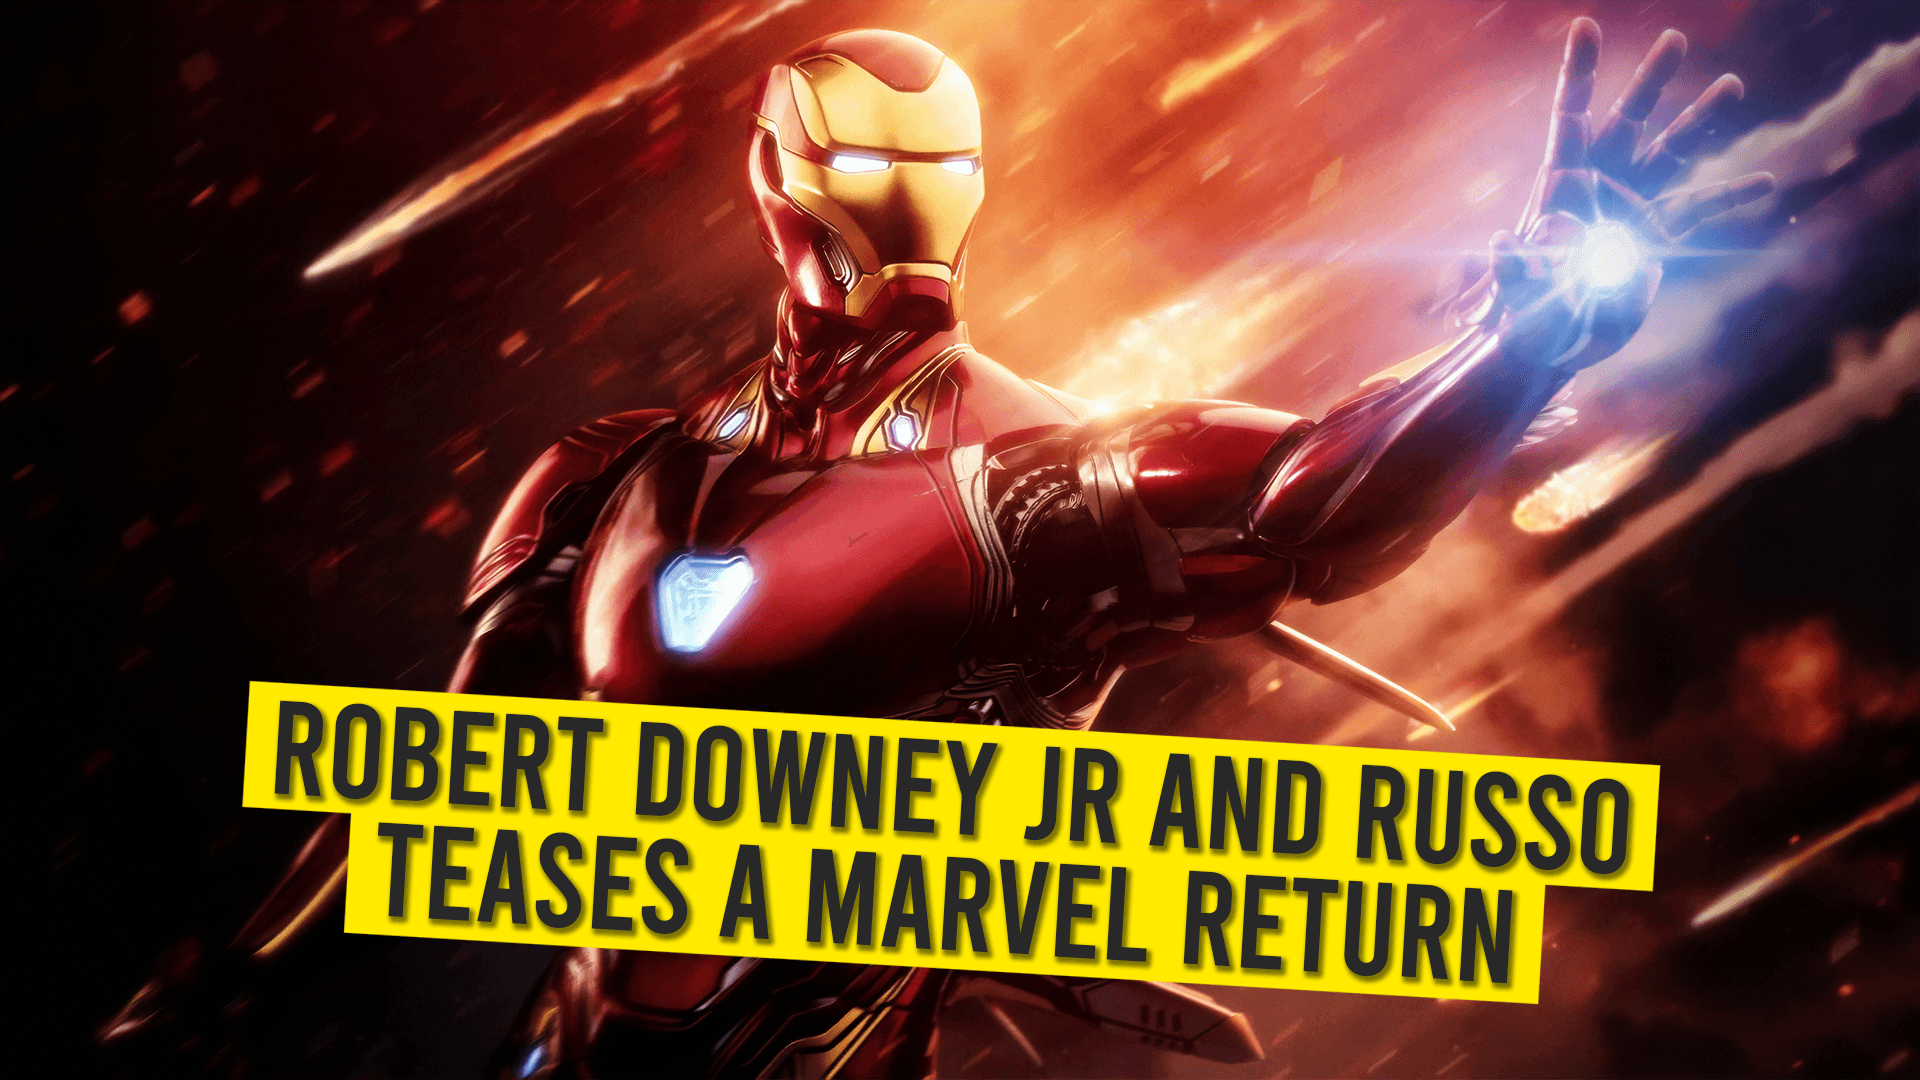 Robert Downey Jr and Russo Teases A Marvel Return